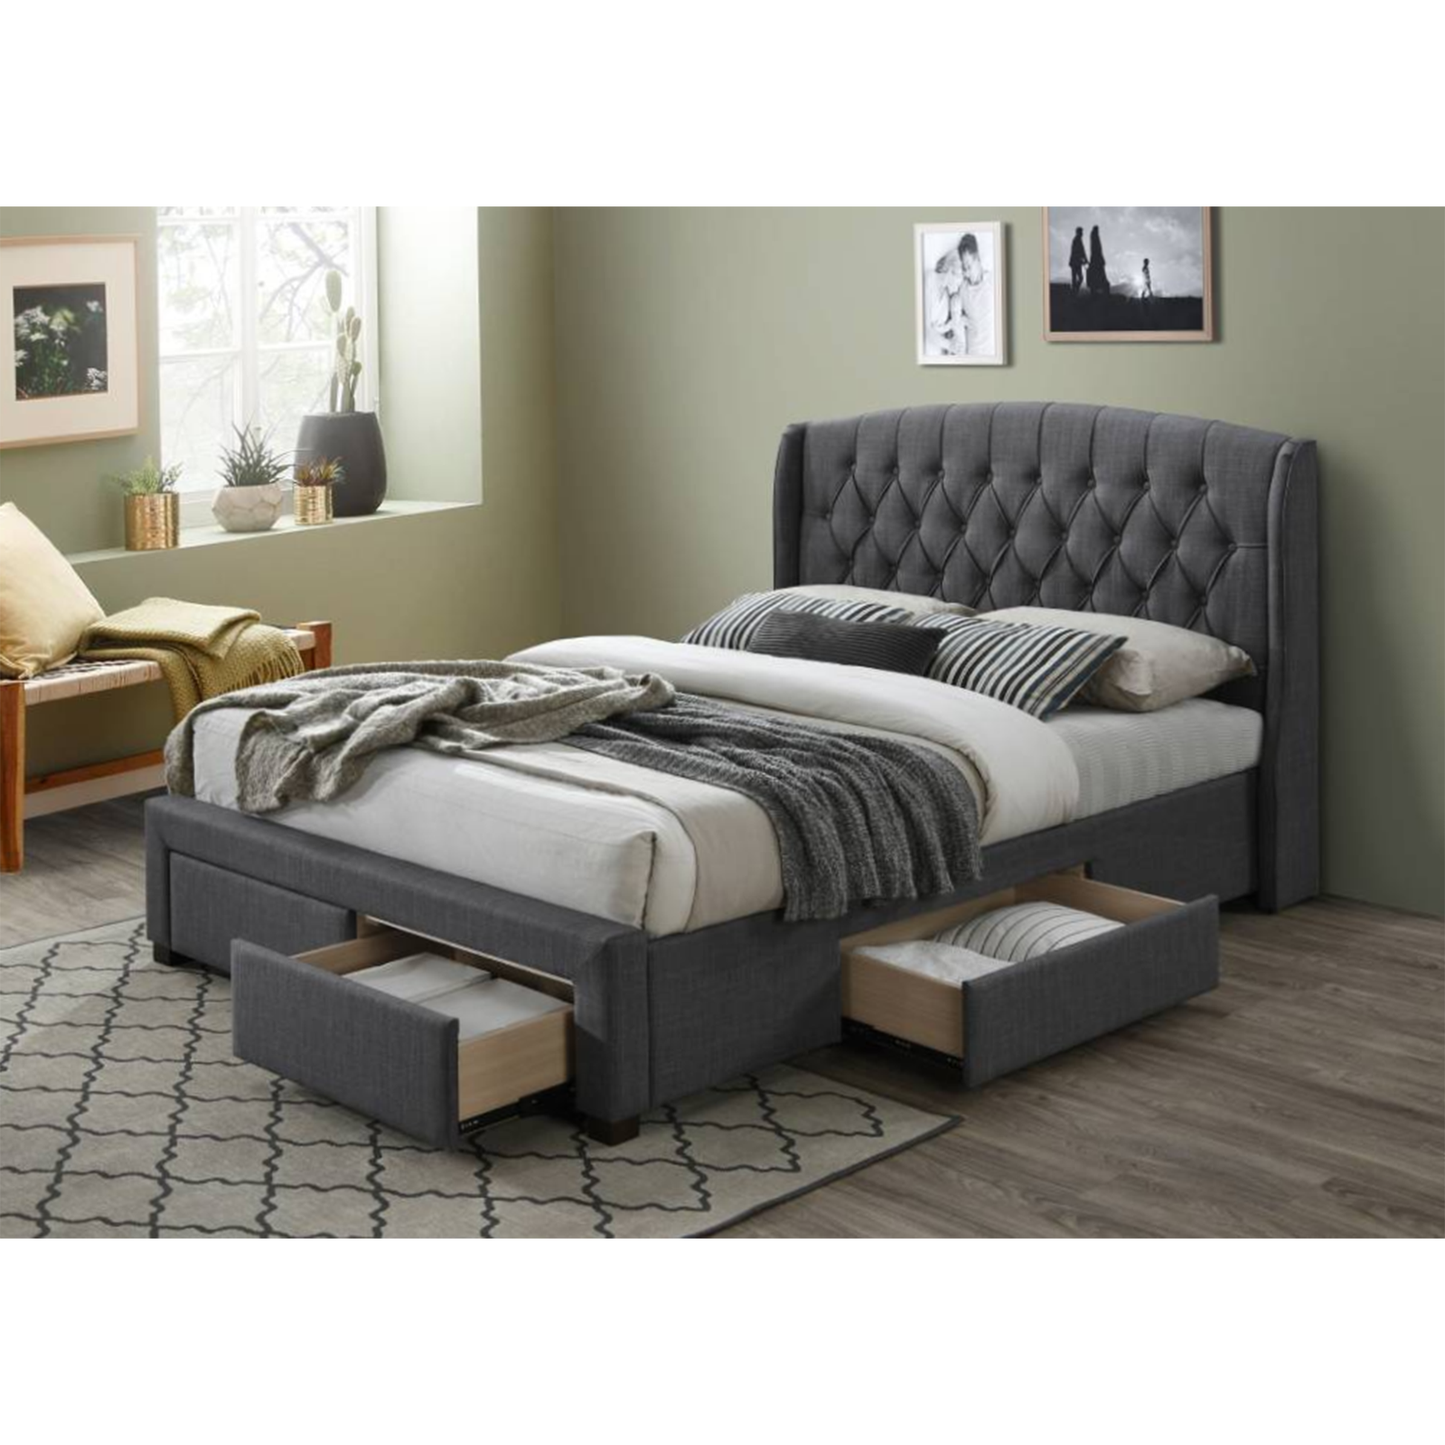 Kingston Bed with 4 Storage Drawers